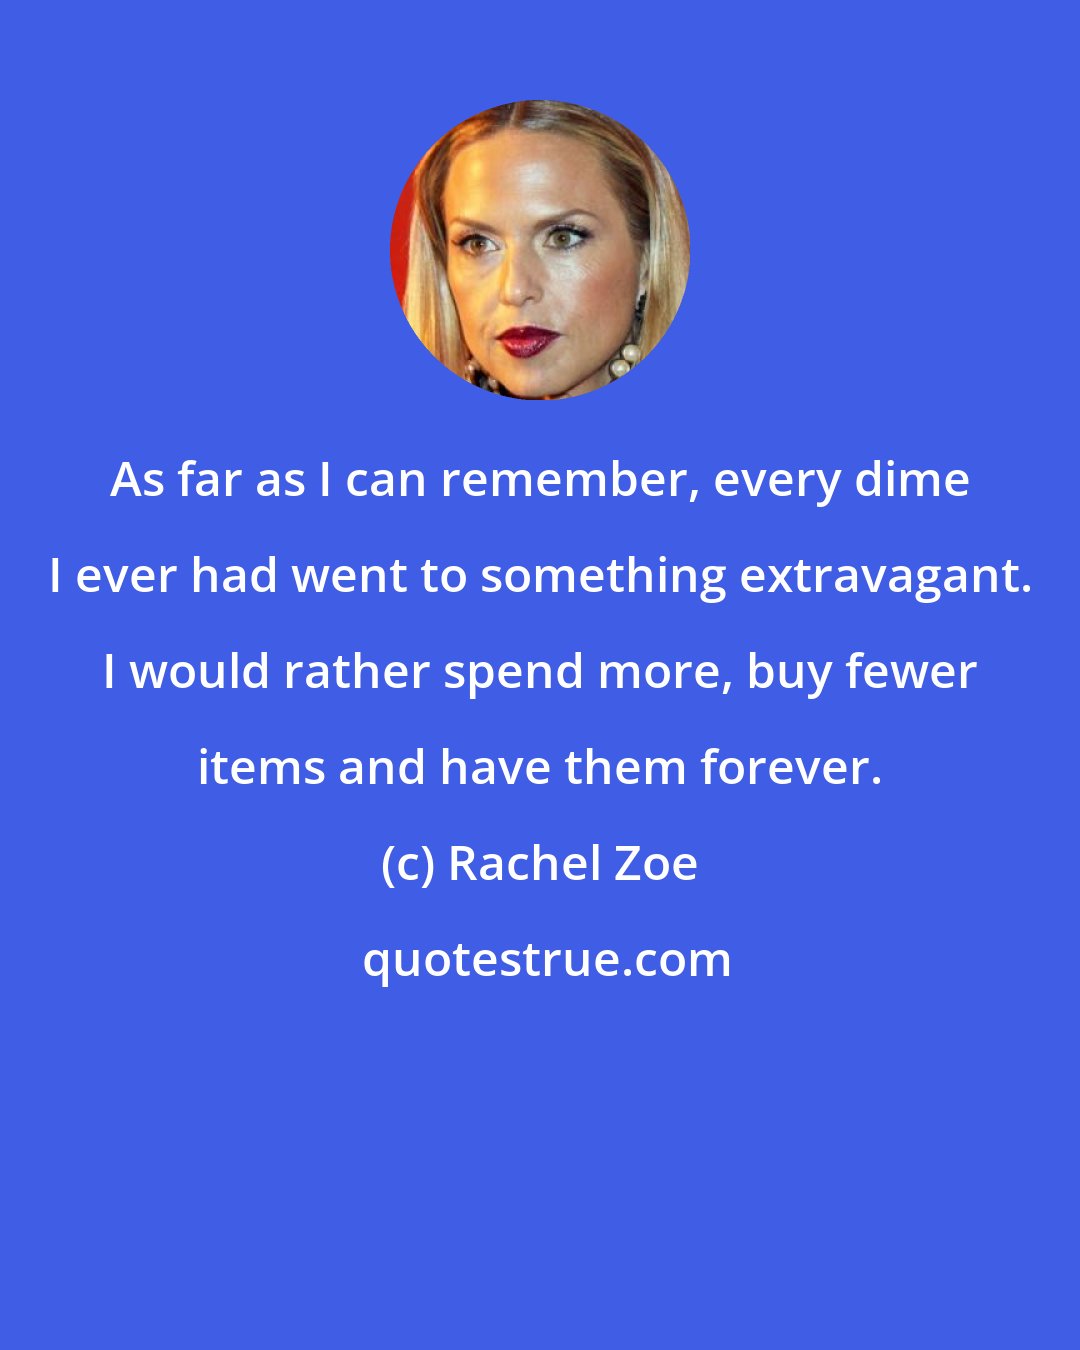 Rachel Zoe: As far as I can remember, every dime I ever had went to something extravagant. I would rather spend more, buy fewer items and have them forever.